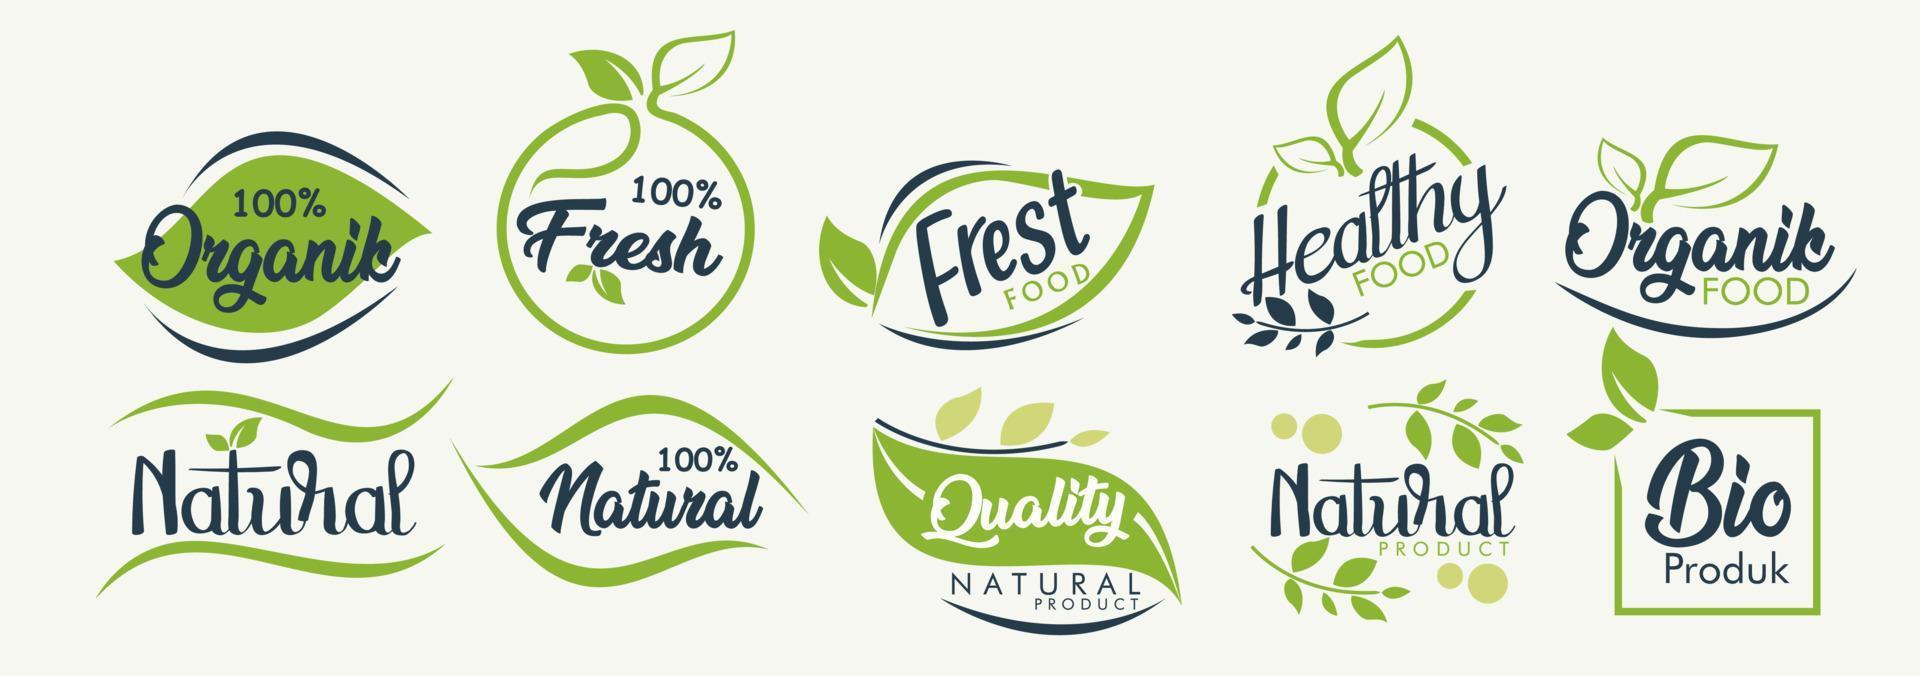 set Organic food, eco, vegan and natural product icons and elements for food market, ecommerce, organic products packaging, healthy life promotion, restaurant. Hand drawn vector design elements